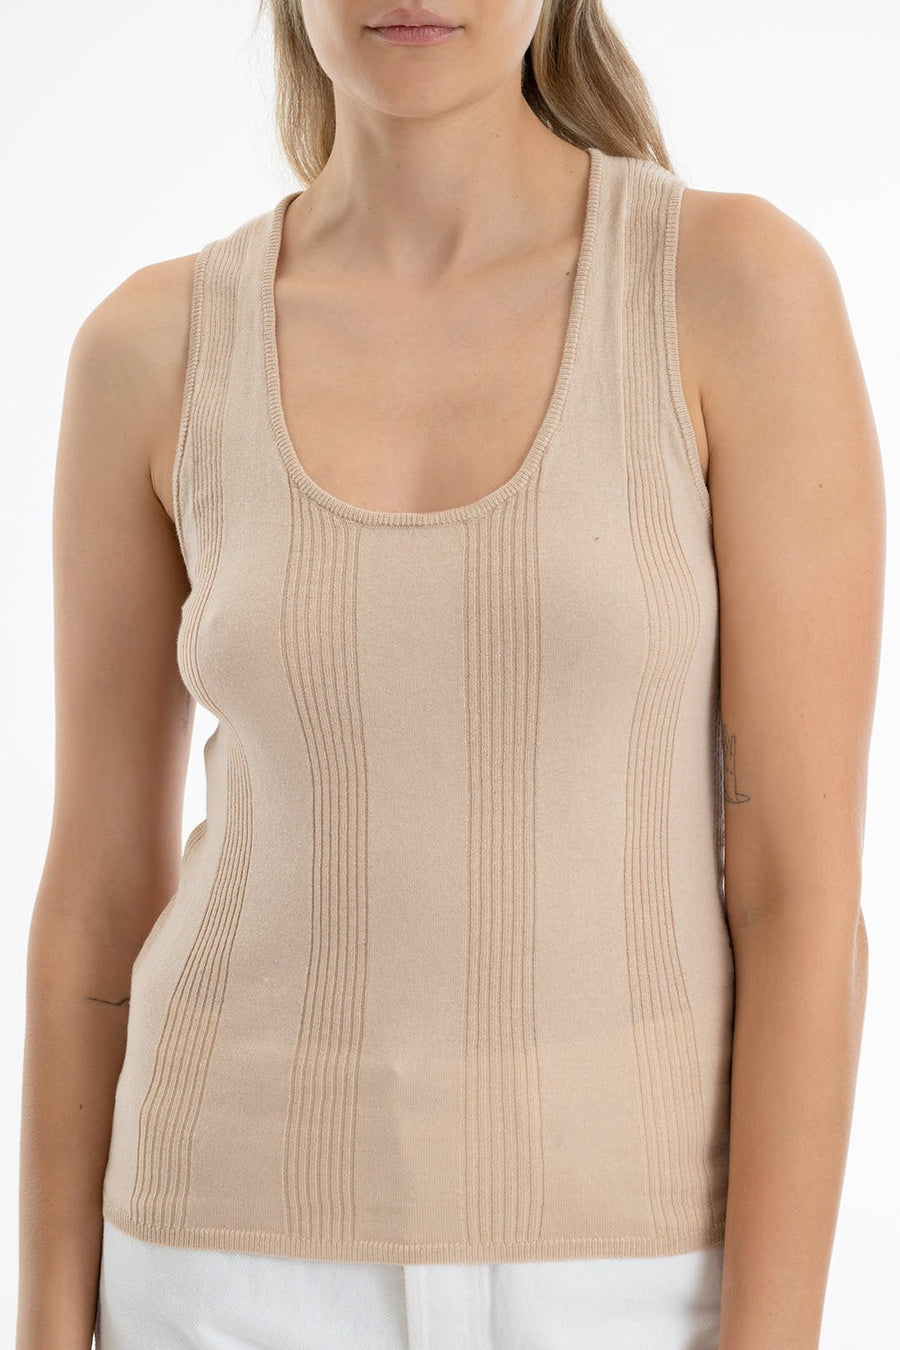 HONEYCOMB KNIT CAMI, POWDER - Burning Torch Online Boutique